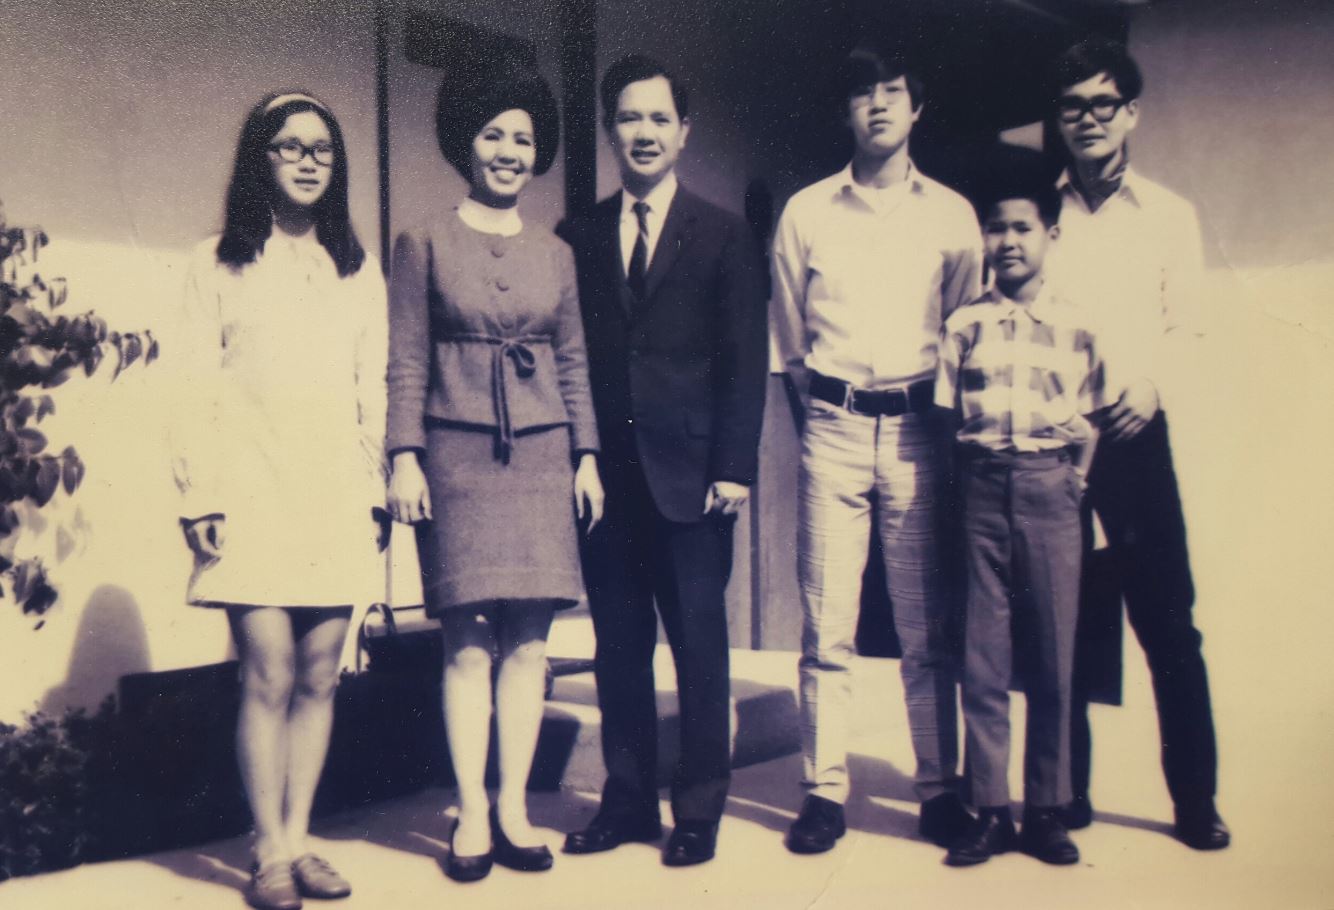 "This picture was taken in 1969, Monterey. The Dovan clan had been one of the first Vietnamese families to emigrate to the US. The patriarch, Hien Dovan was offered a teaching post at the Language Institute on the West Coast and came over during the Eisenhower administration in 1957; his family soon followed. At school the young Dovans were thought to be either Koreans (because of the recent Korean War), Chinese or Japanese because at that time very few people had ever heard of Vietnam.”